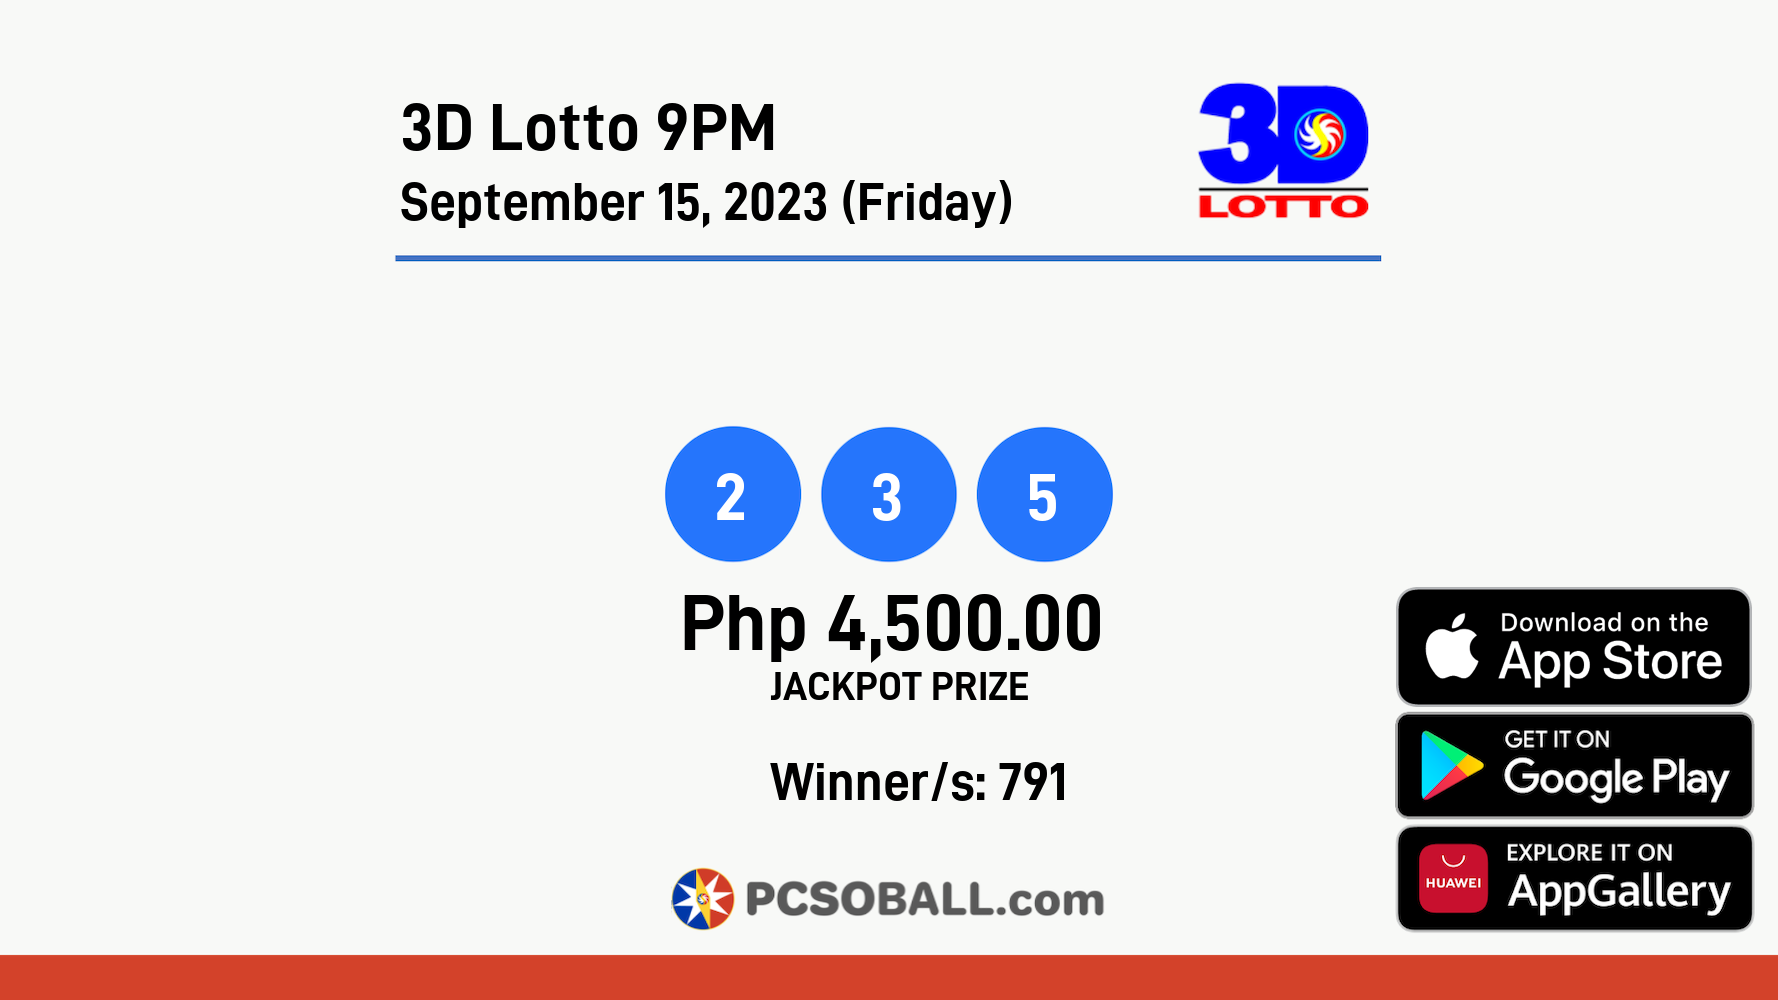 3D Lotto 9PM September 15, 2023 (Friday) Result